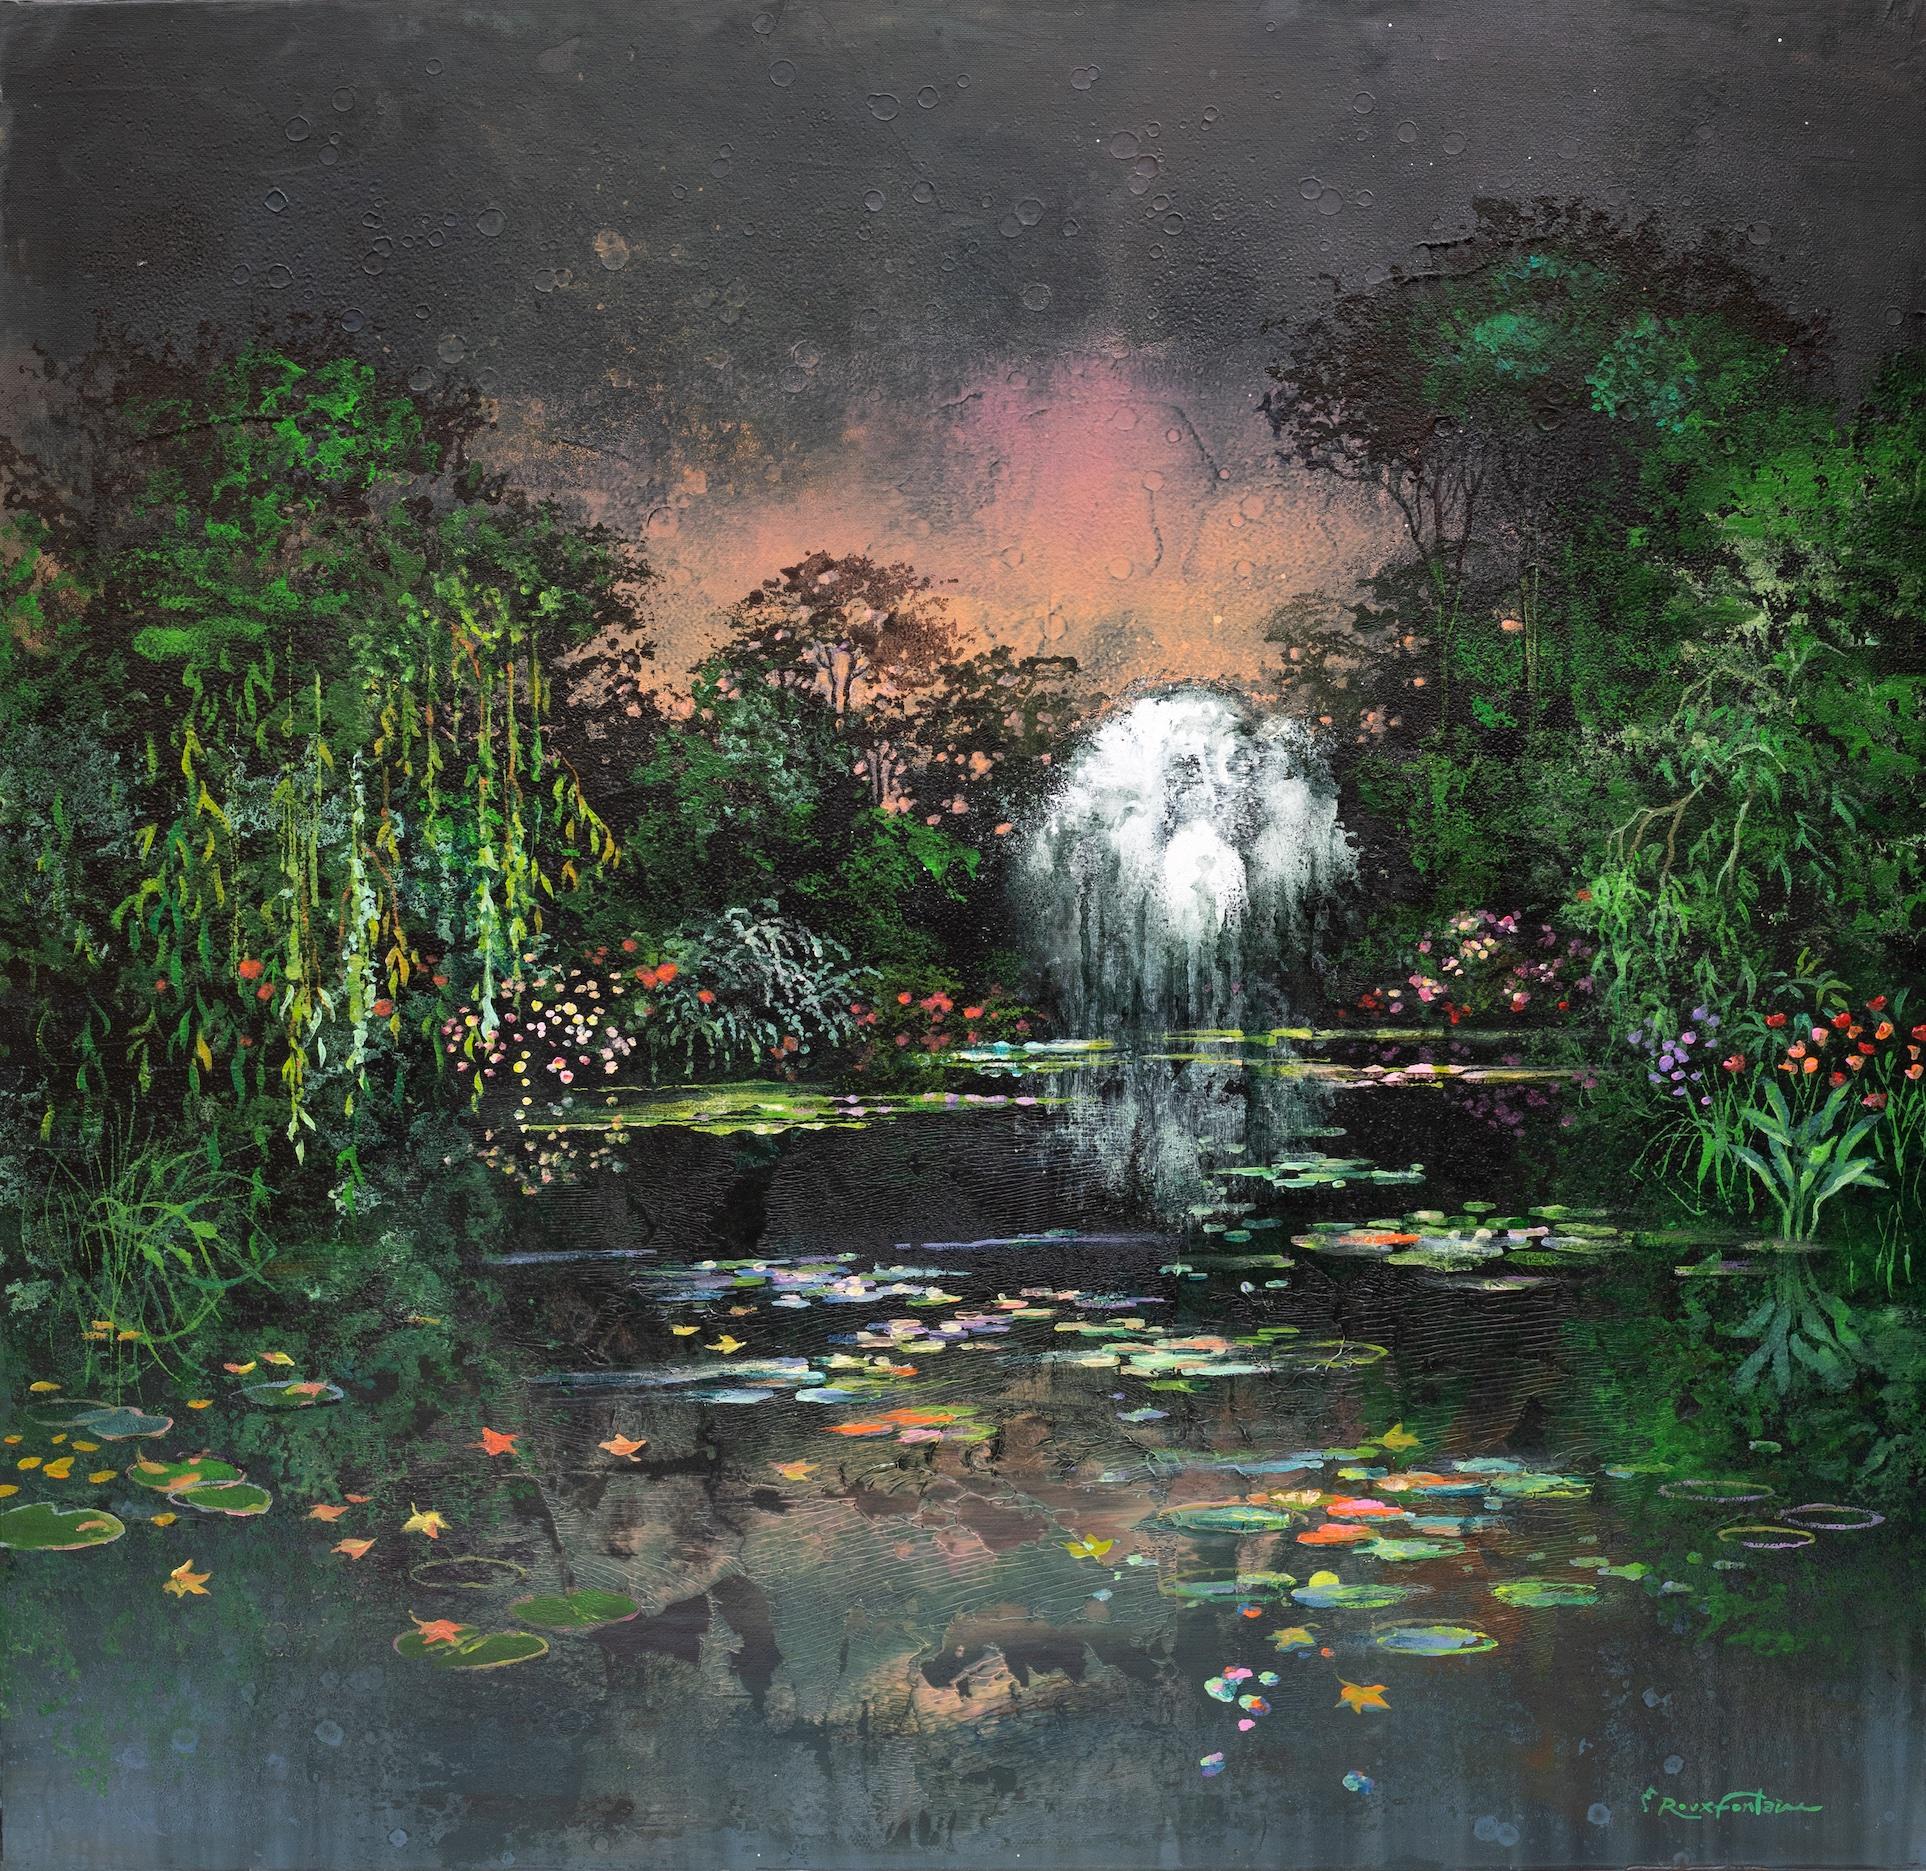 By the light of night - Painting by Eric Roux-Fontaine